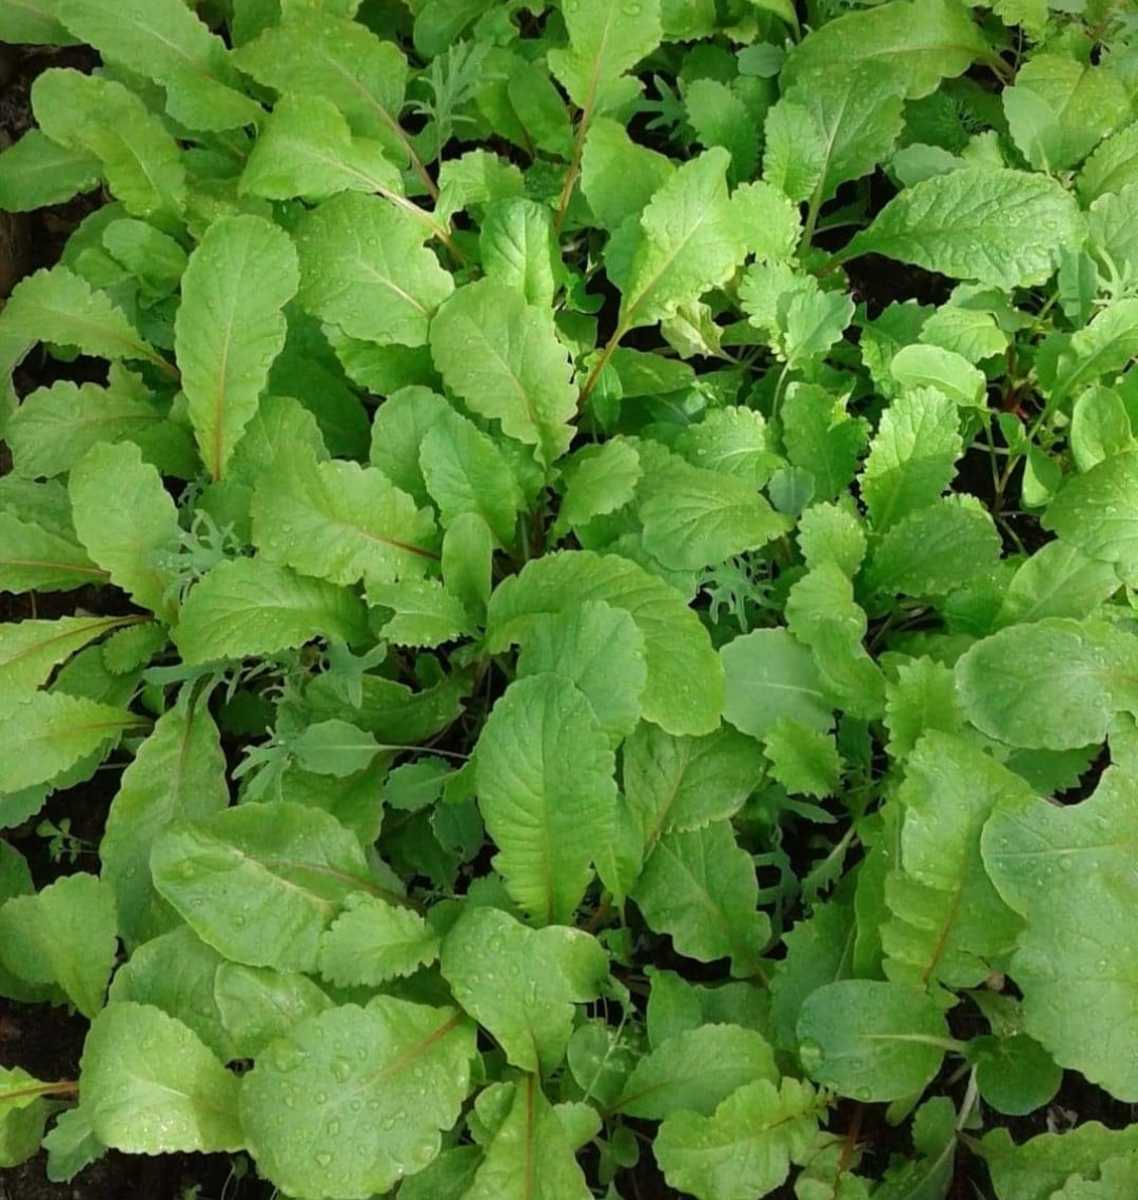 Mustard greens are also known as Chinese mustard, Indian mustard, or leaf mustard.